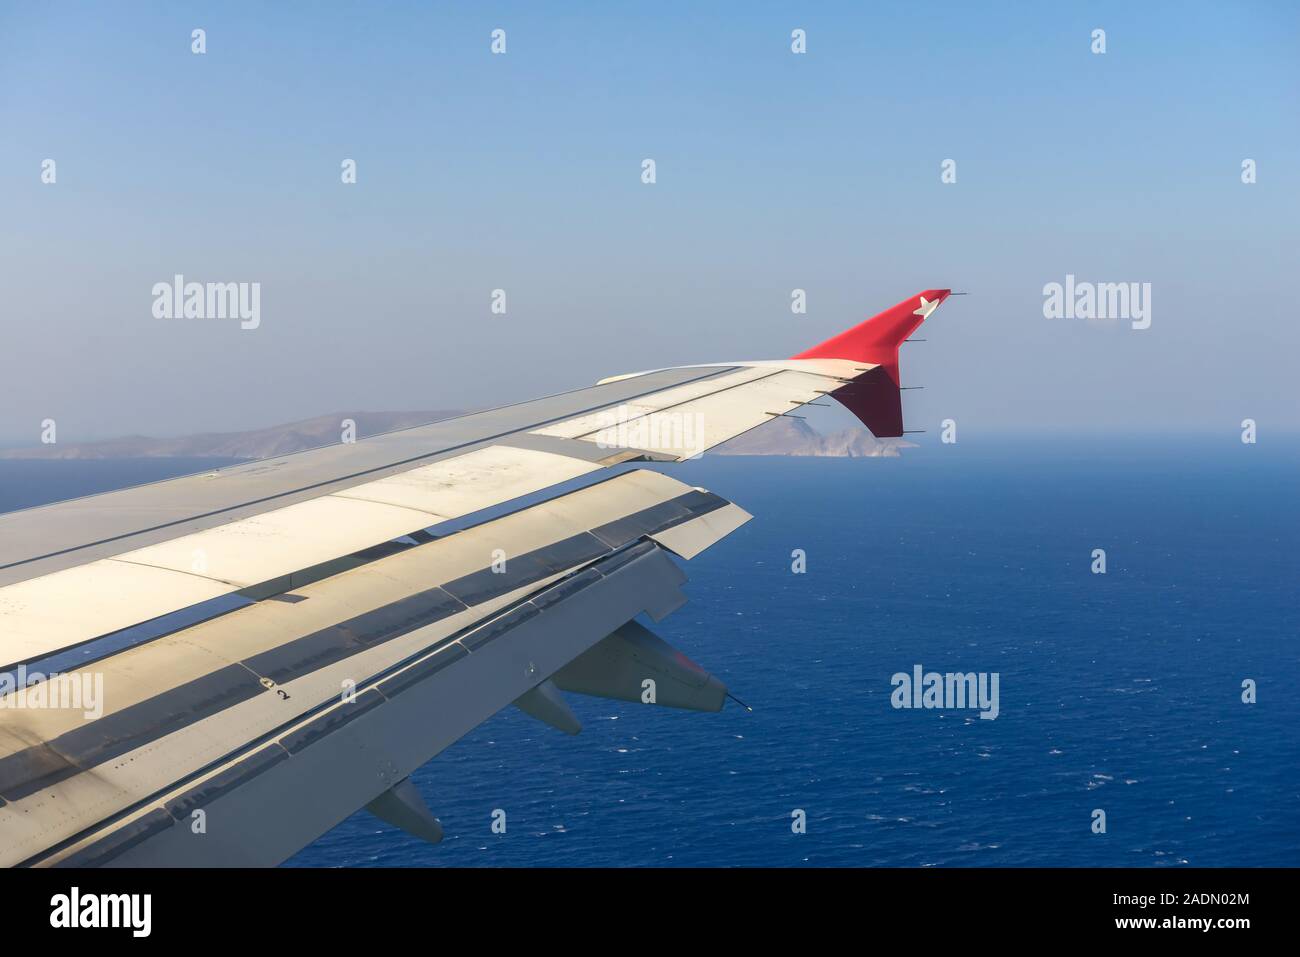 Wing of an airplane flying above the ocean. Stock Photo